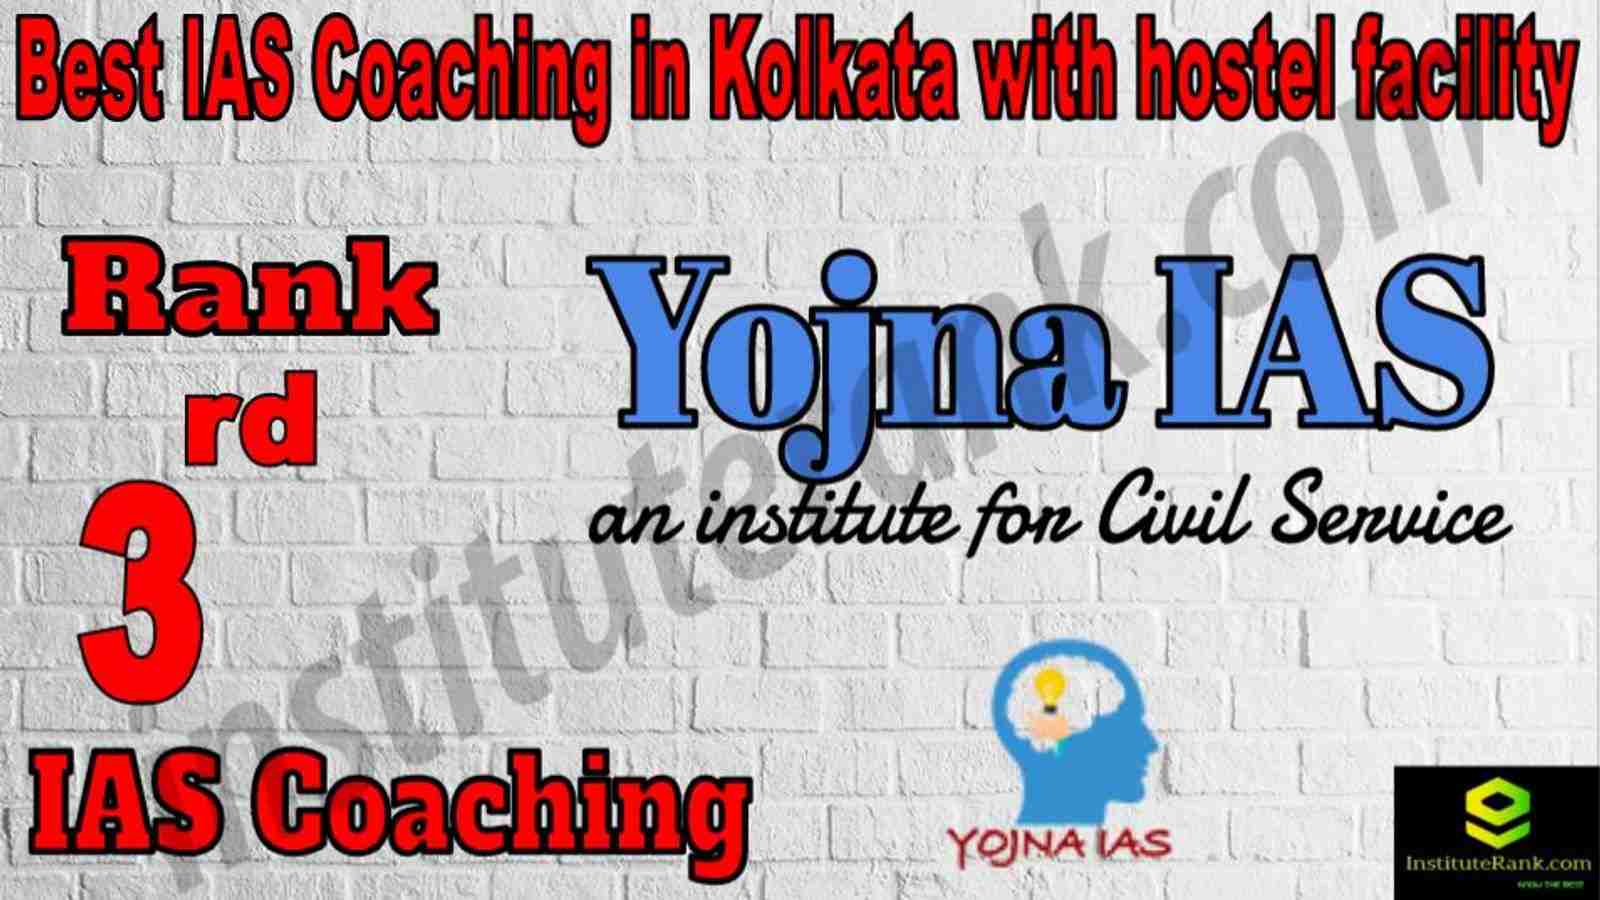 3rd Best IAS Coaching in Kolkata with hostel facility